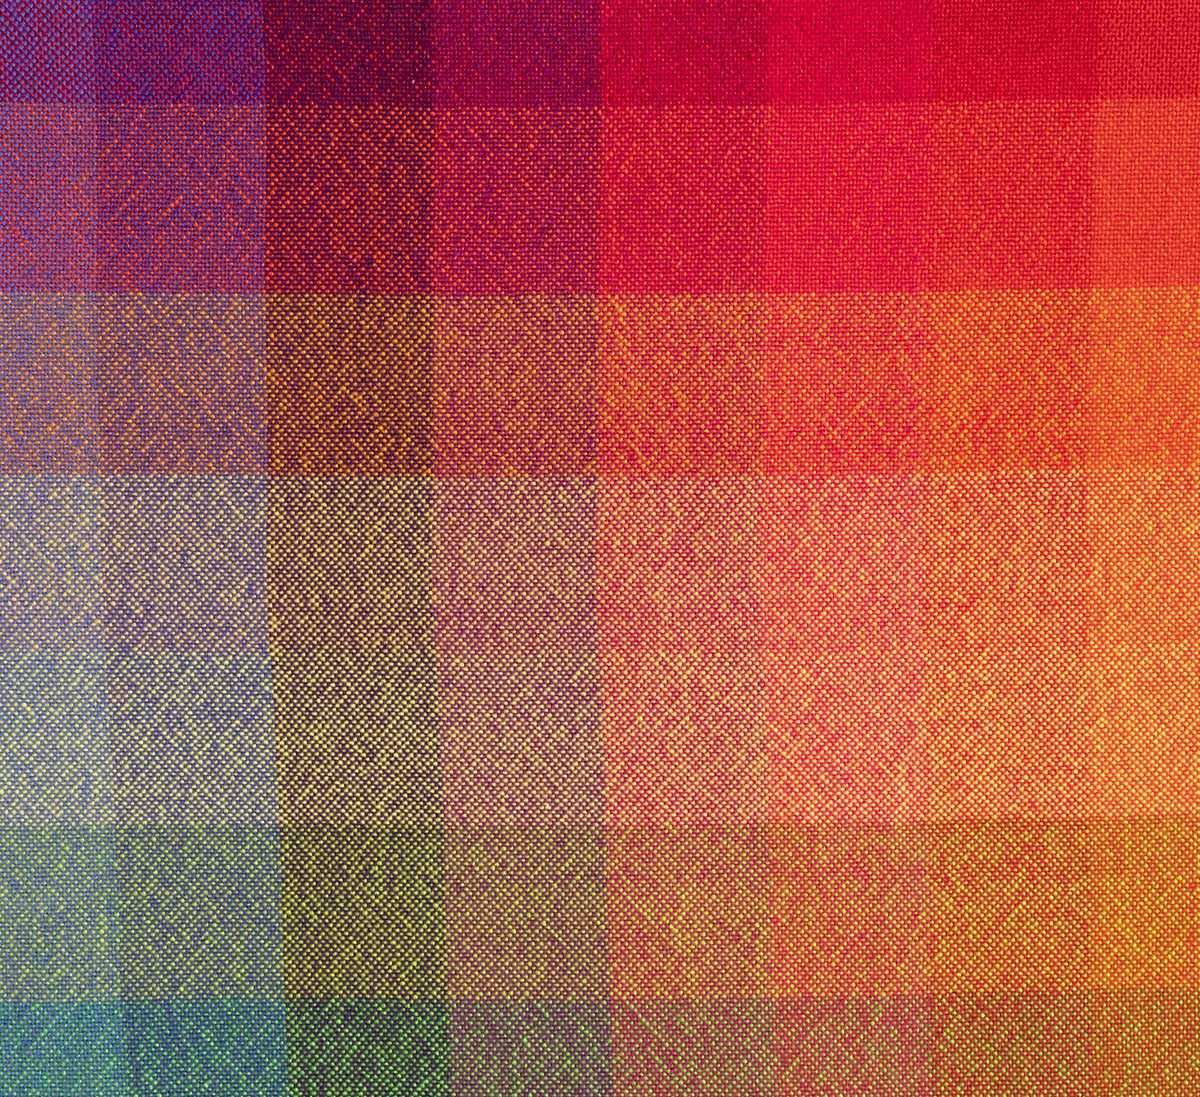 Controlling the Primaries in Your Color Mixing | Handwoven